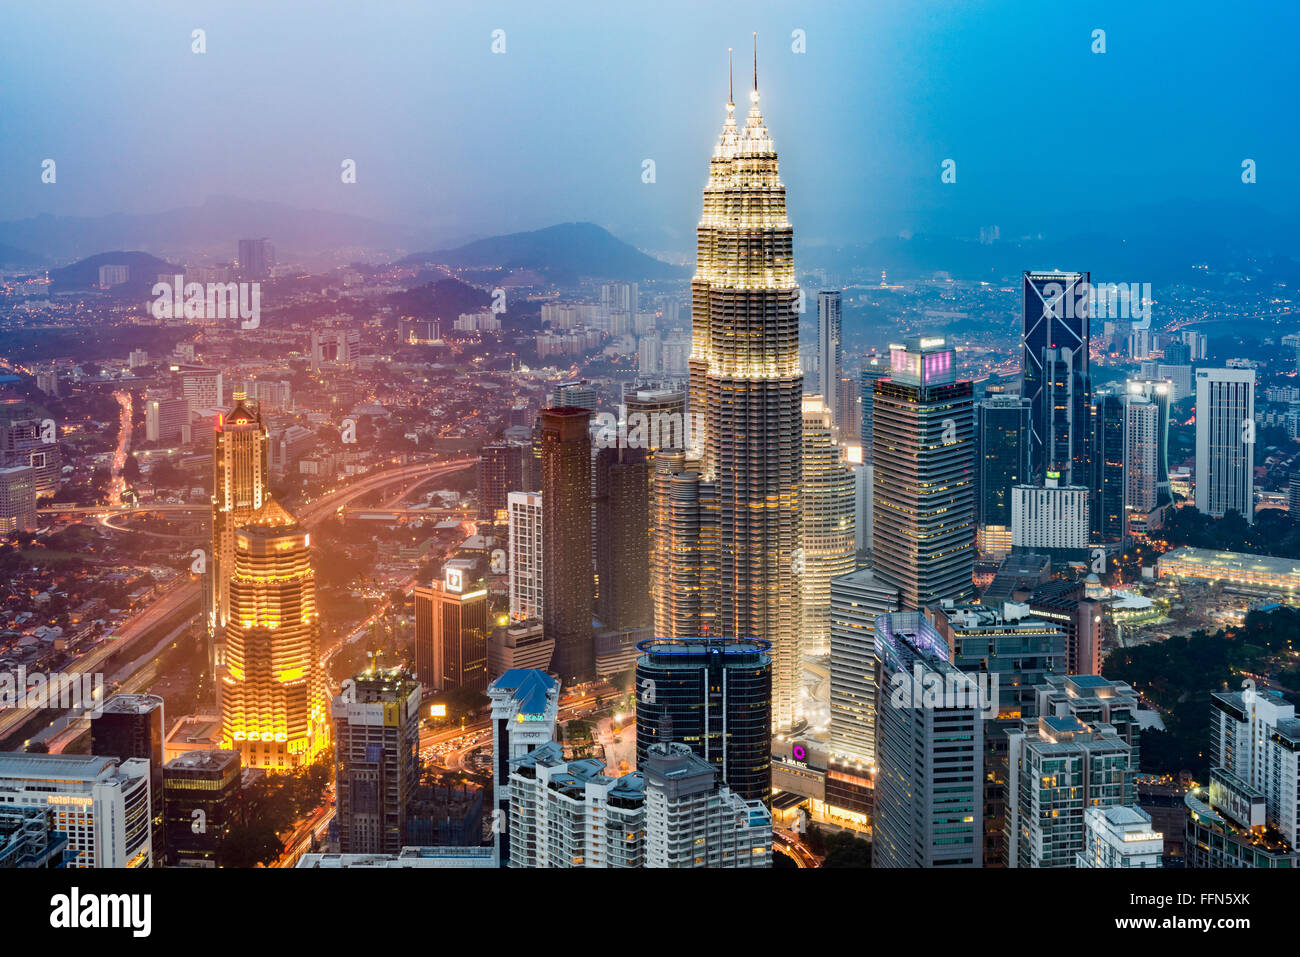 Aerial view of Kuala Lumpur city with the Petronas Towers, Malaysia, Southeast Asia at night Stock Photo